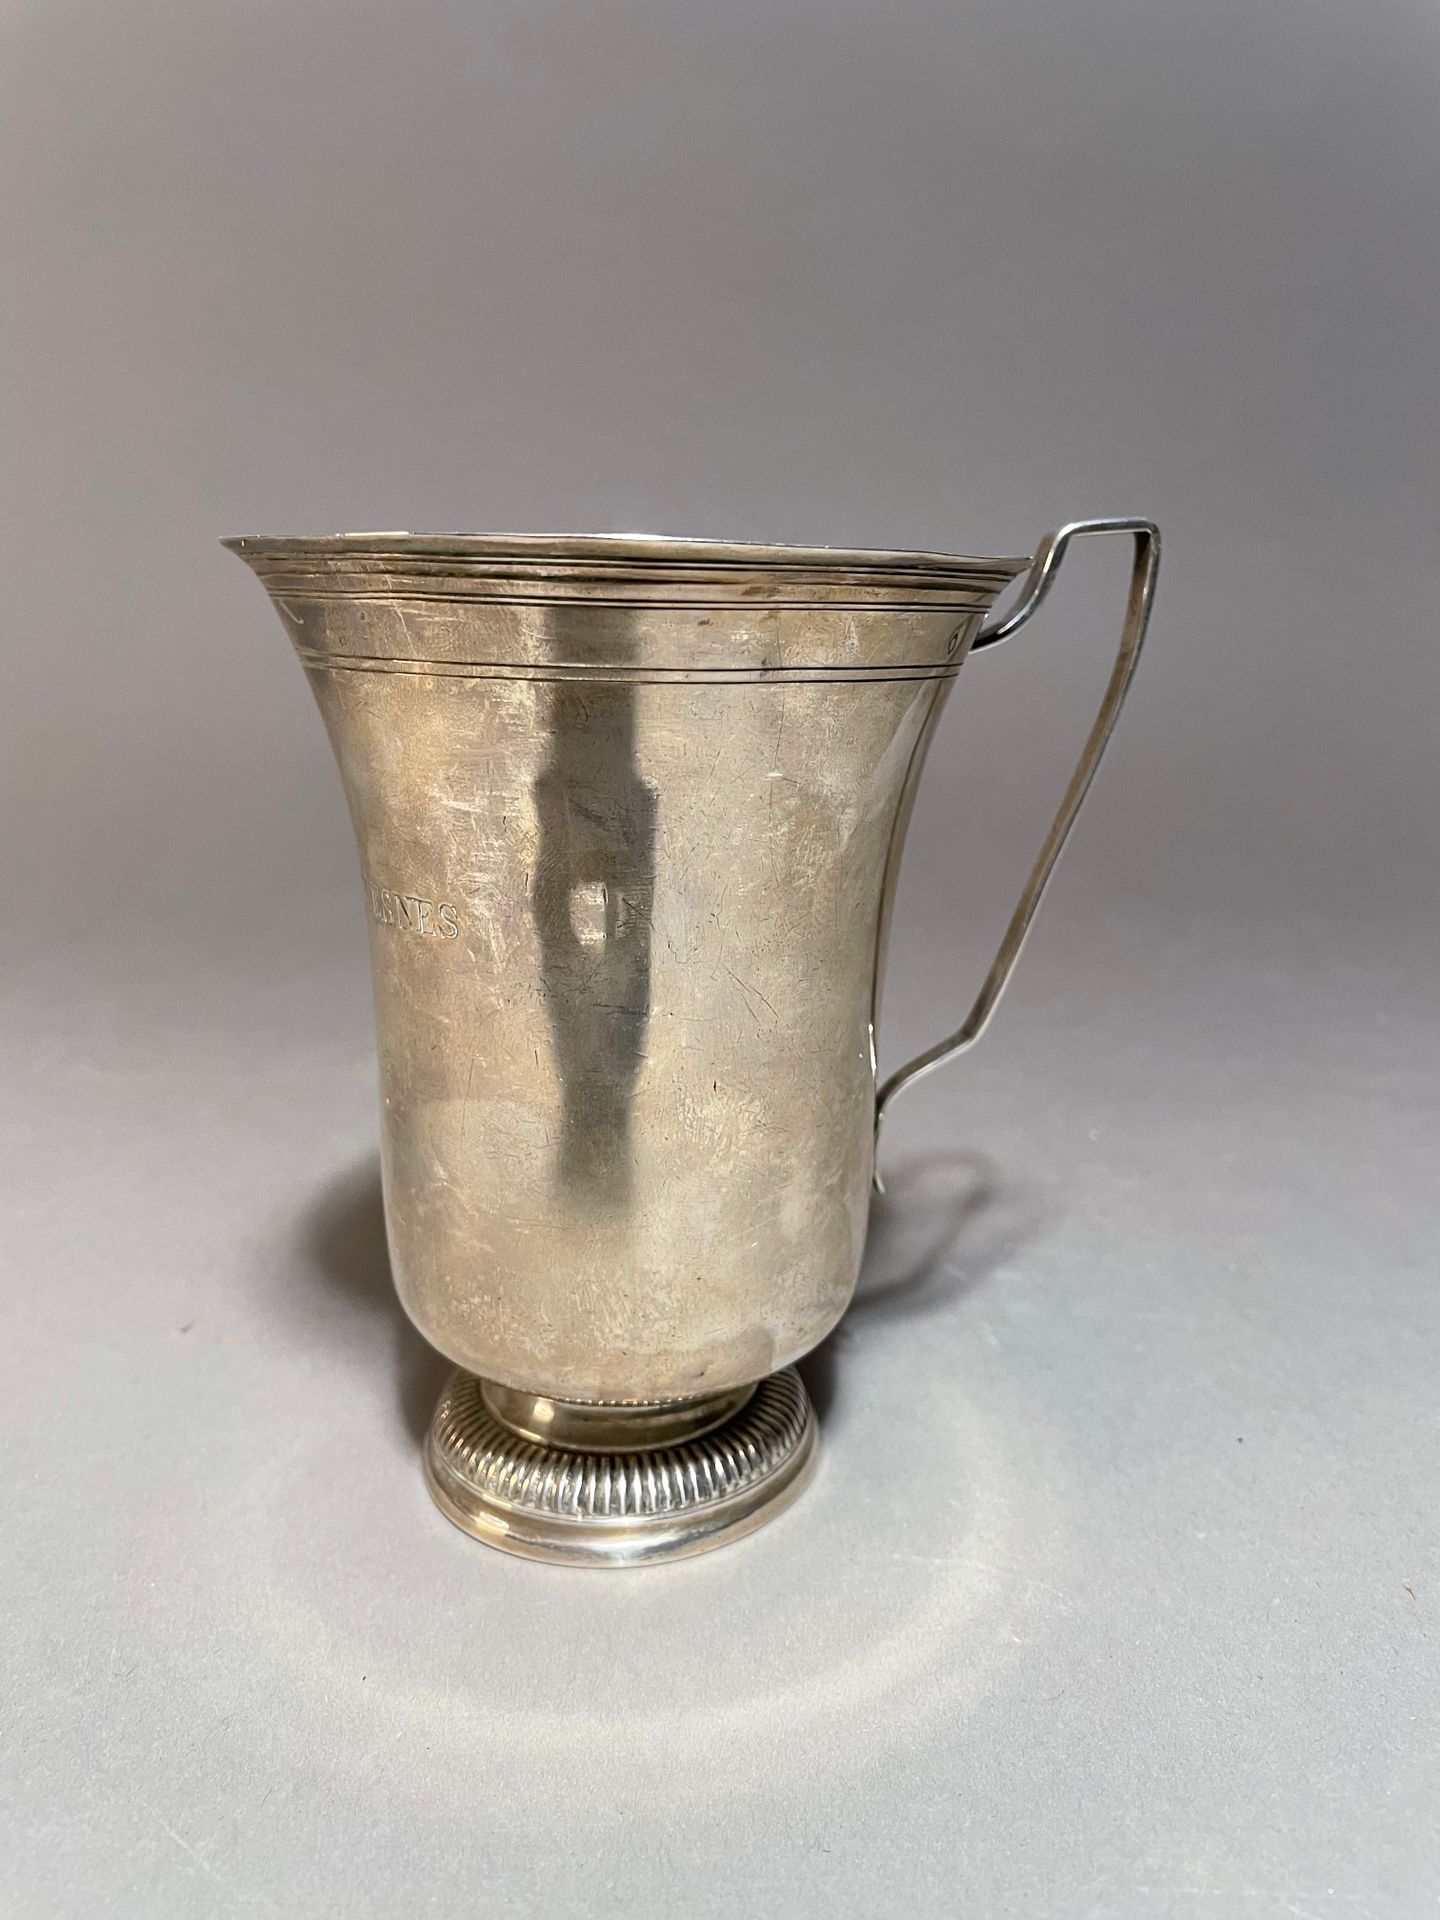 Null Tulip-shaped kettle
In silver
18th century
Handle added, foot soldered with&hellip;